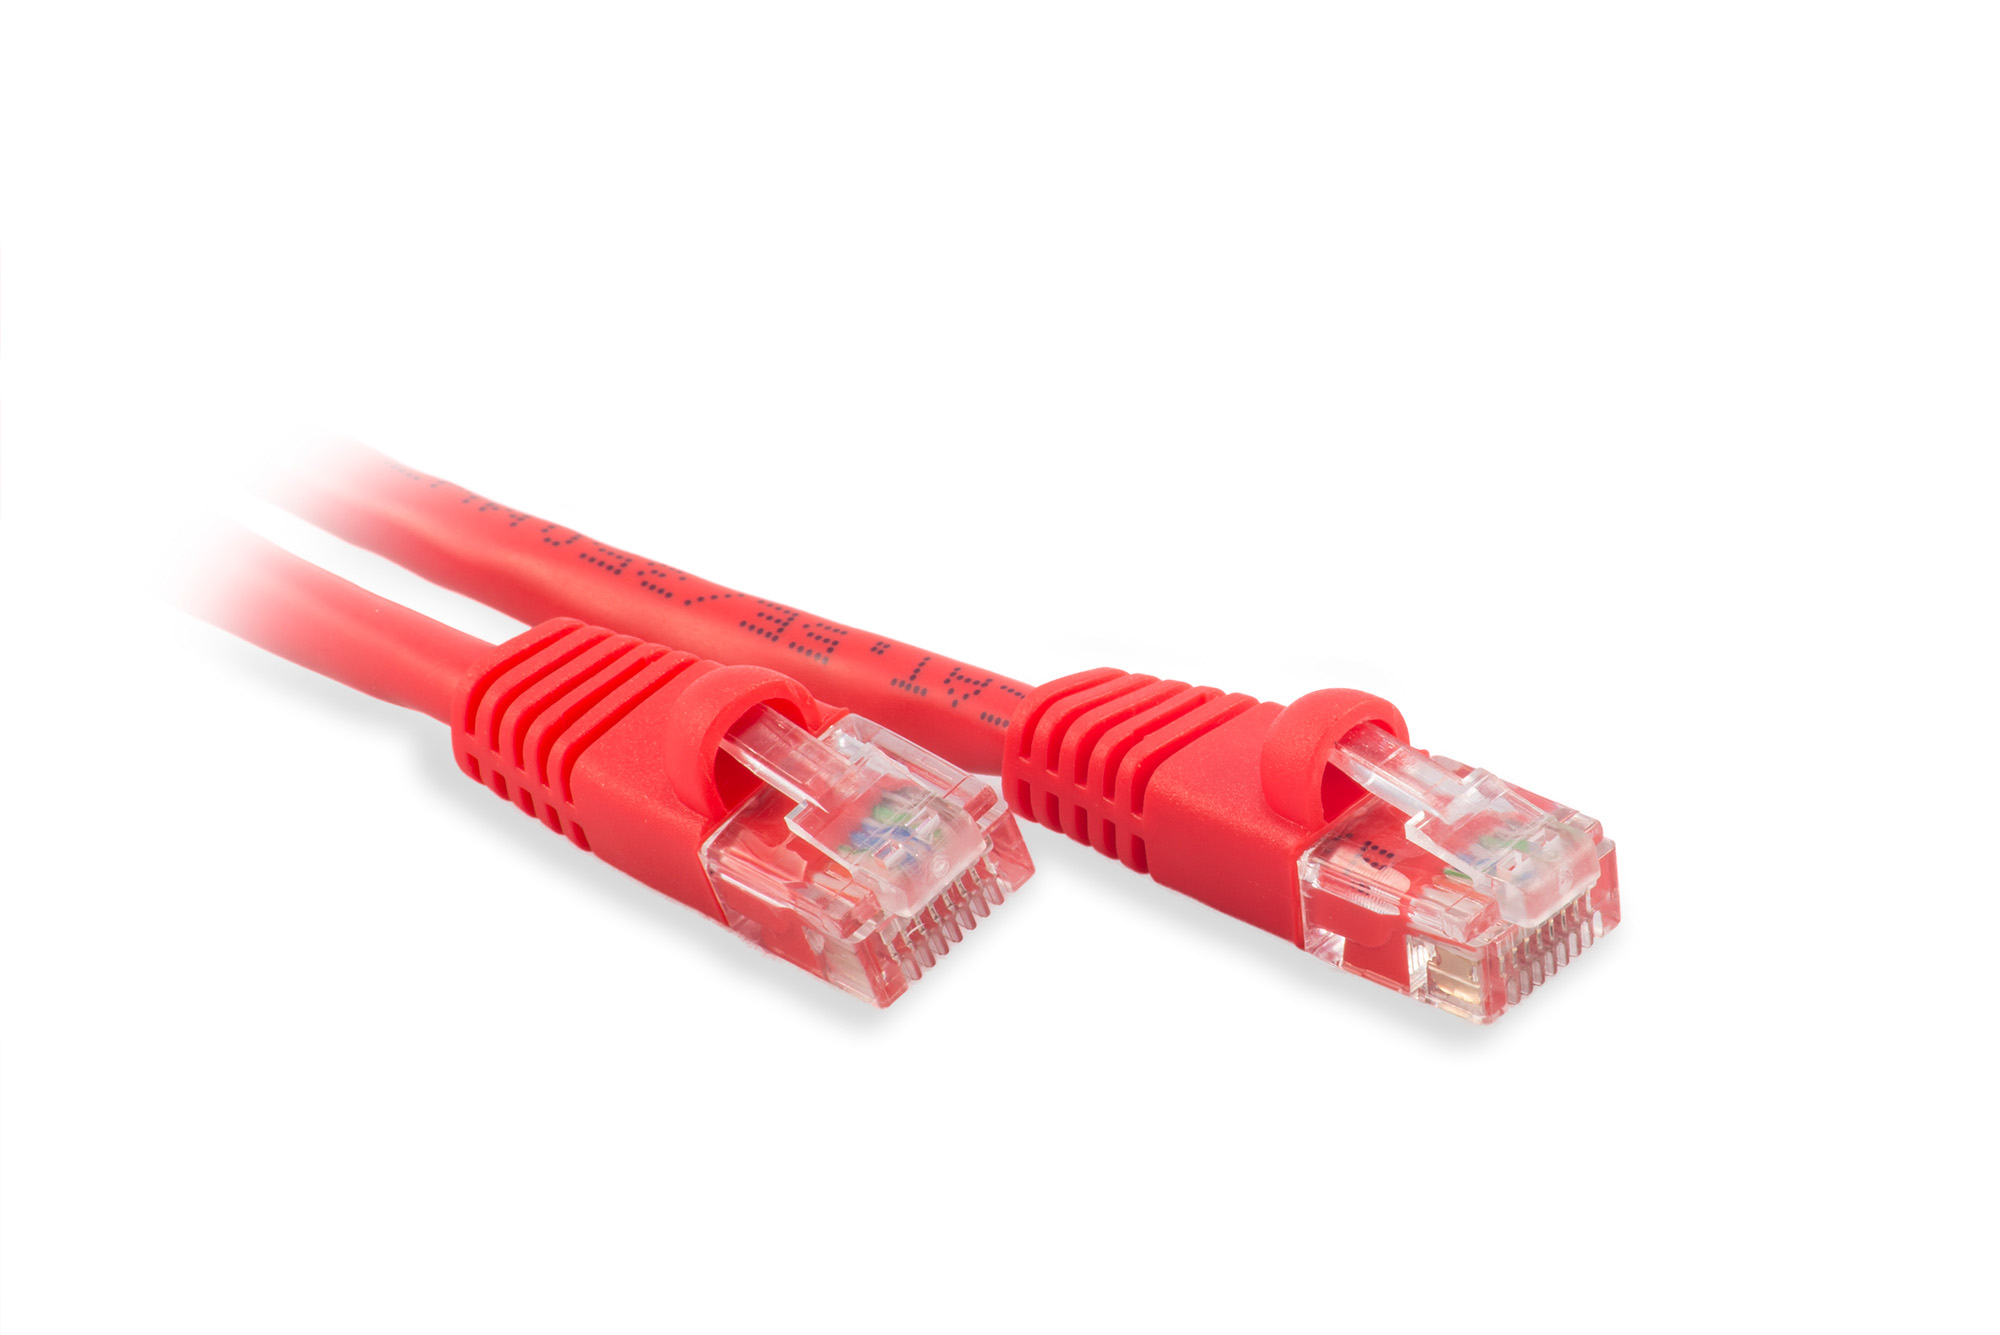 125ft Cat6 Ethernet Patch Cable - Red Color - Snagless Boot